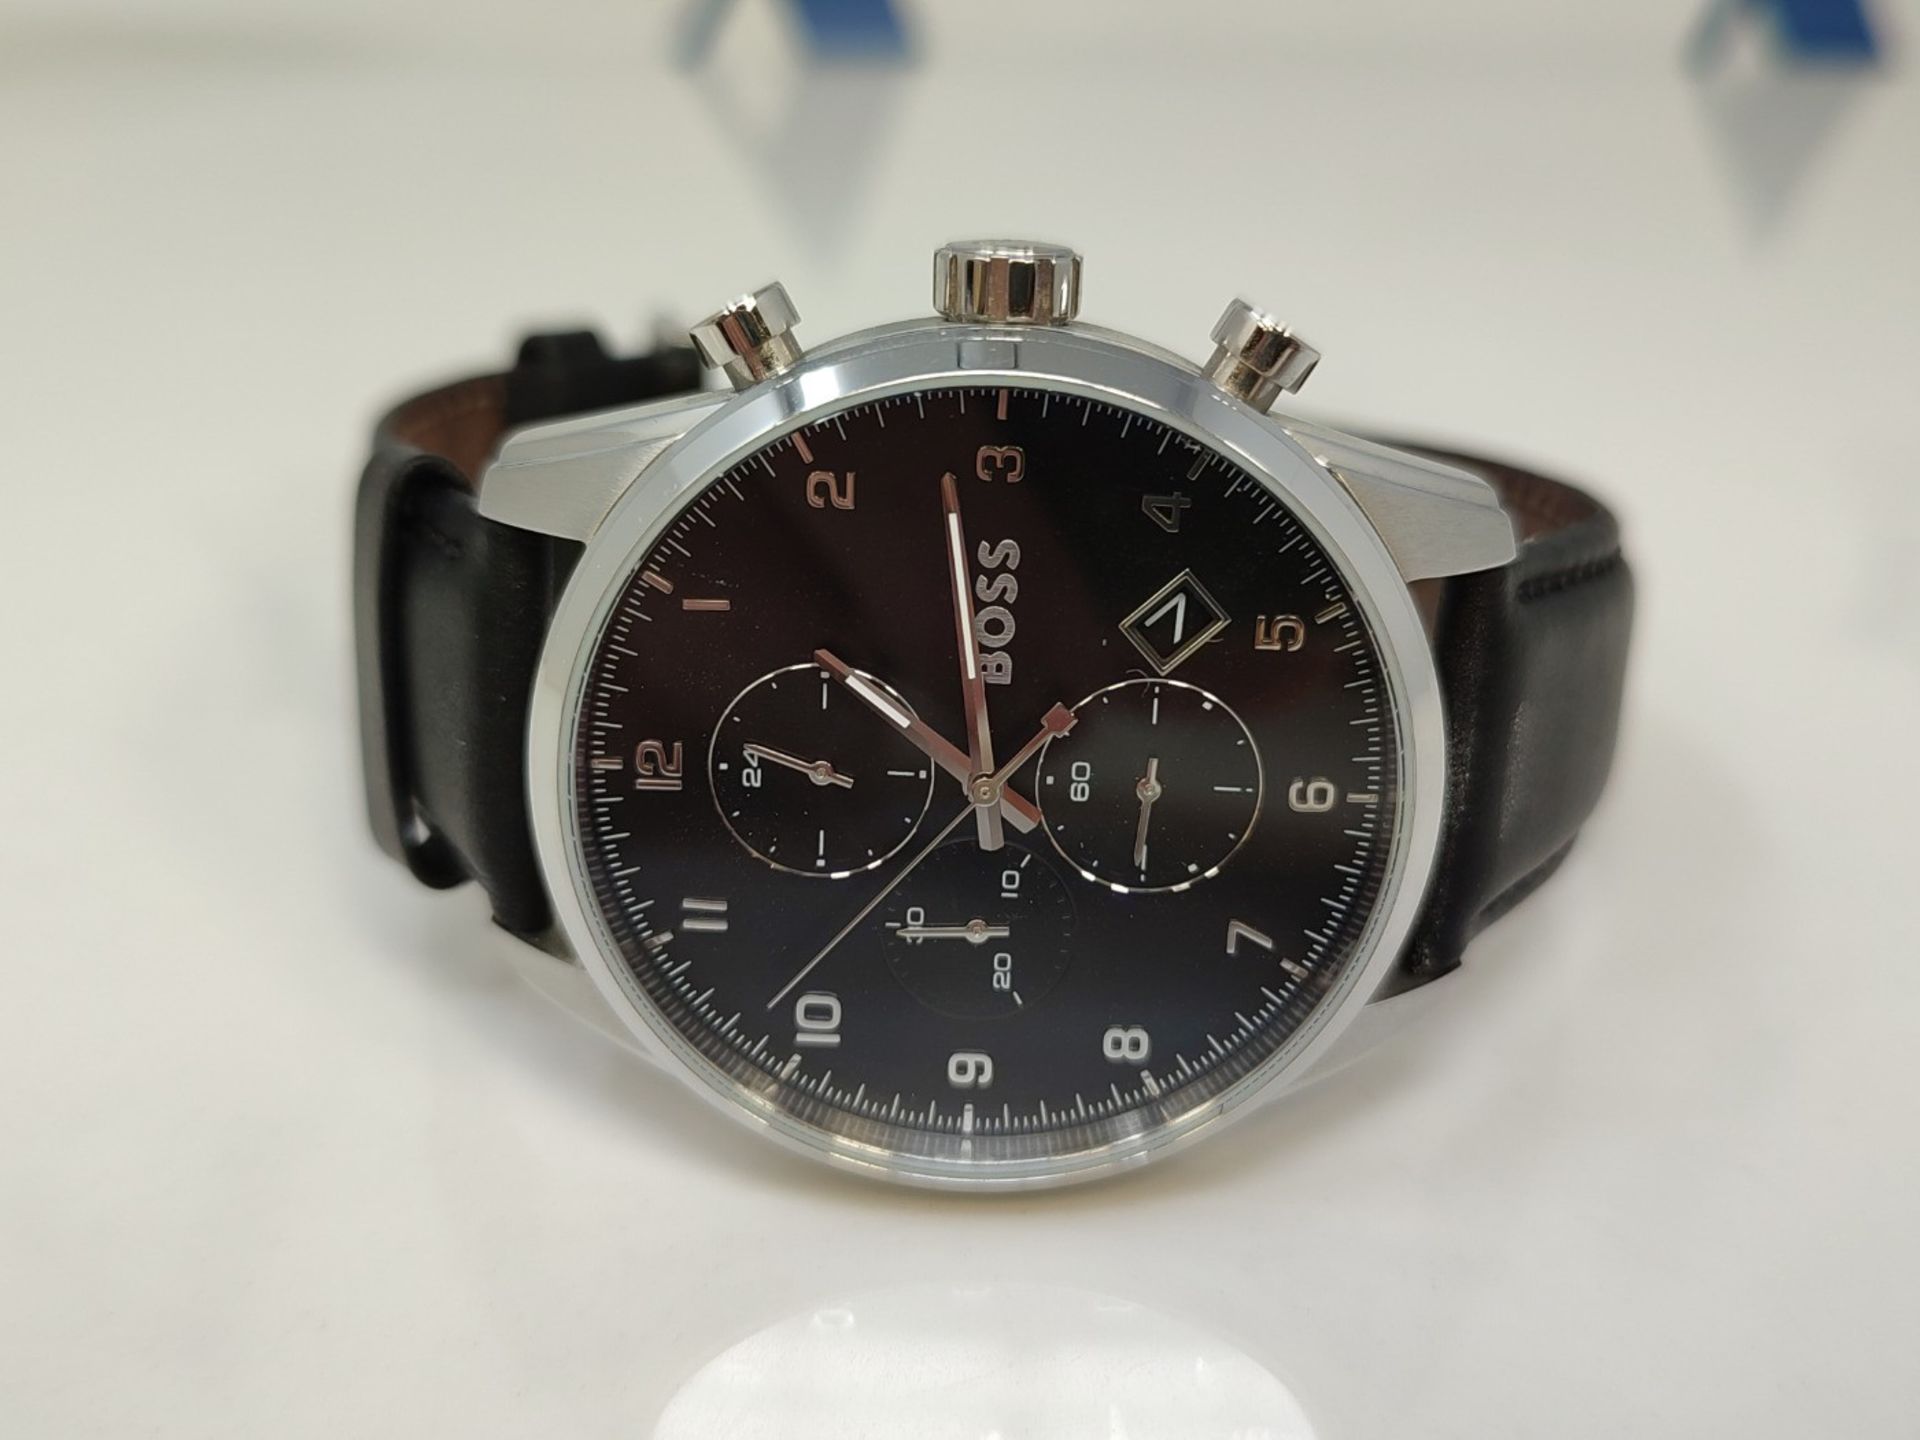 RRP £239.00 BOSS Chronograph Quartz Watch for Men with Black Leather Strap - 1513782 - Image 5 of 6